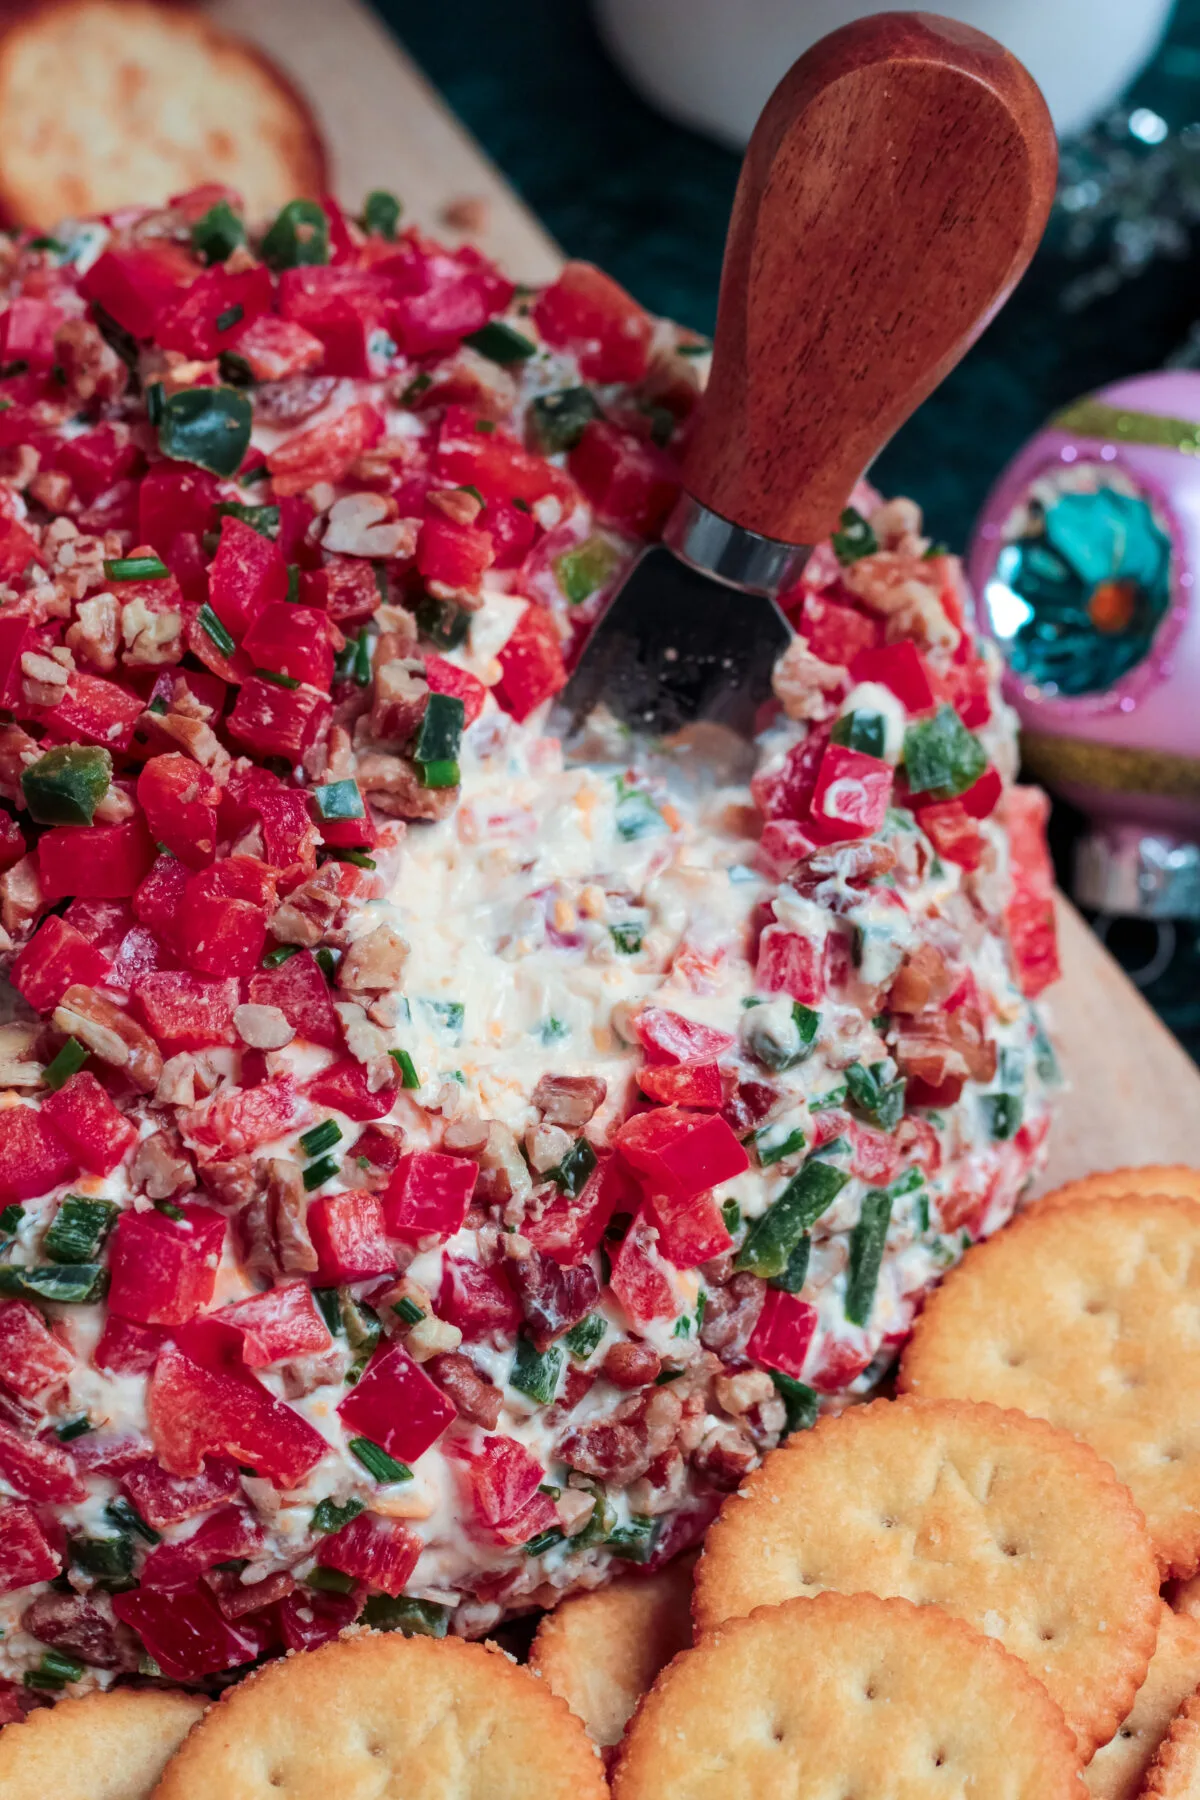 Celebrate the holidays with this simple recipe for a Christmas cheese ball made with sharp cheddar, bell peppers, pecans, and more!